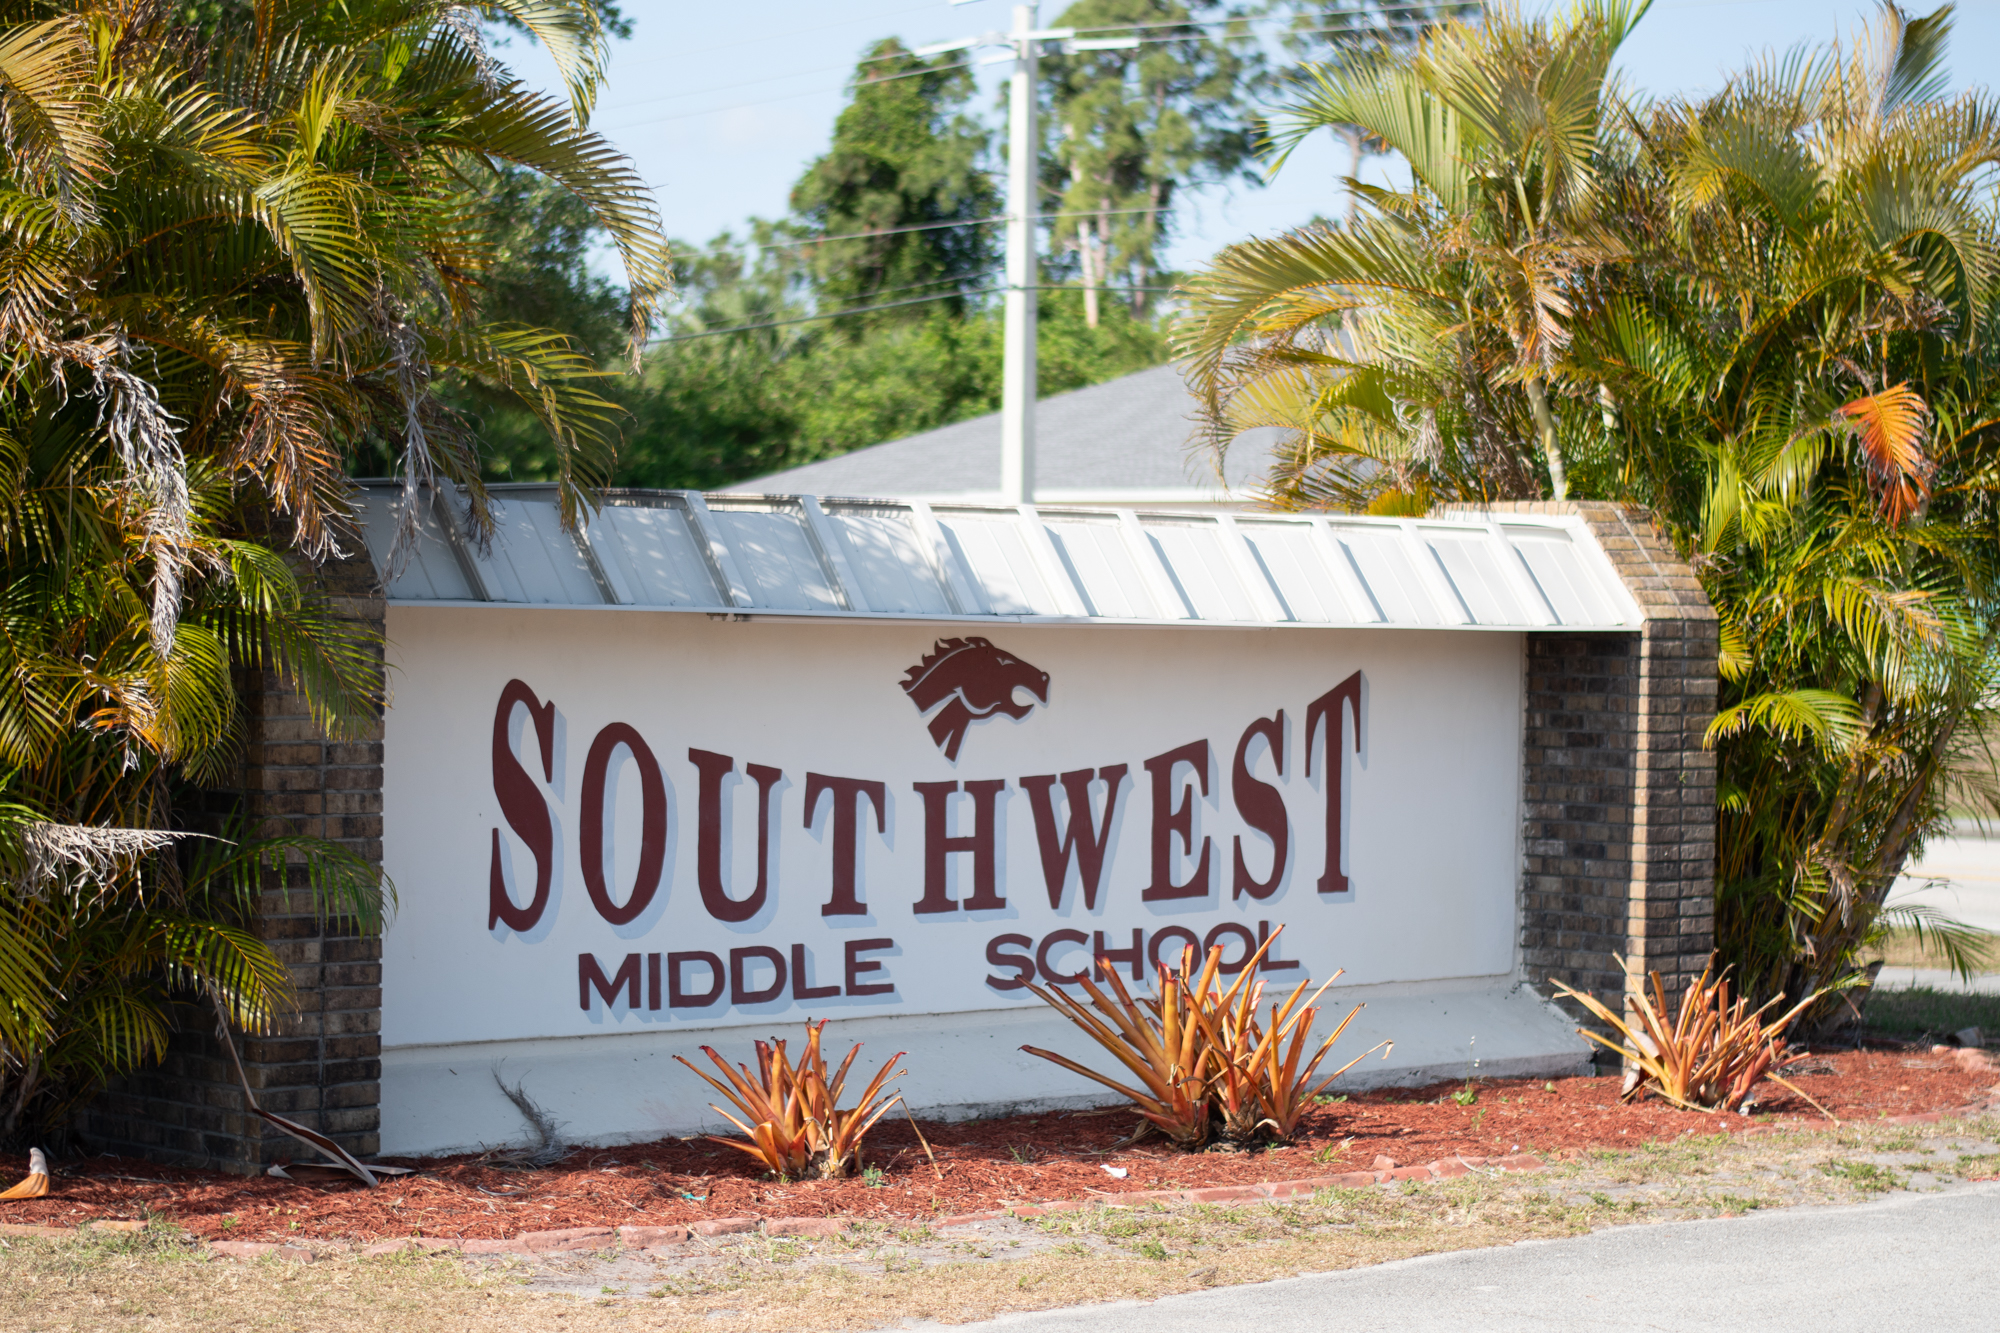 Southwest Middle School sign with trees in background